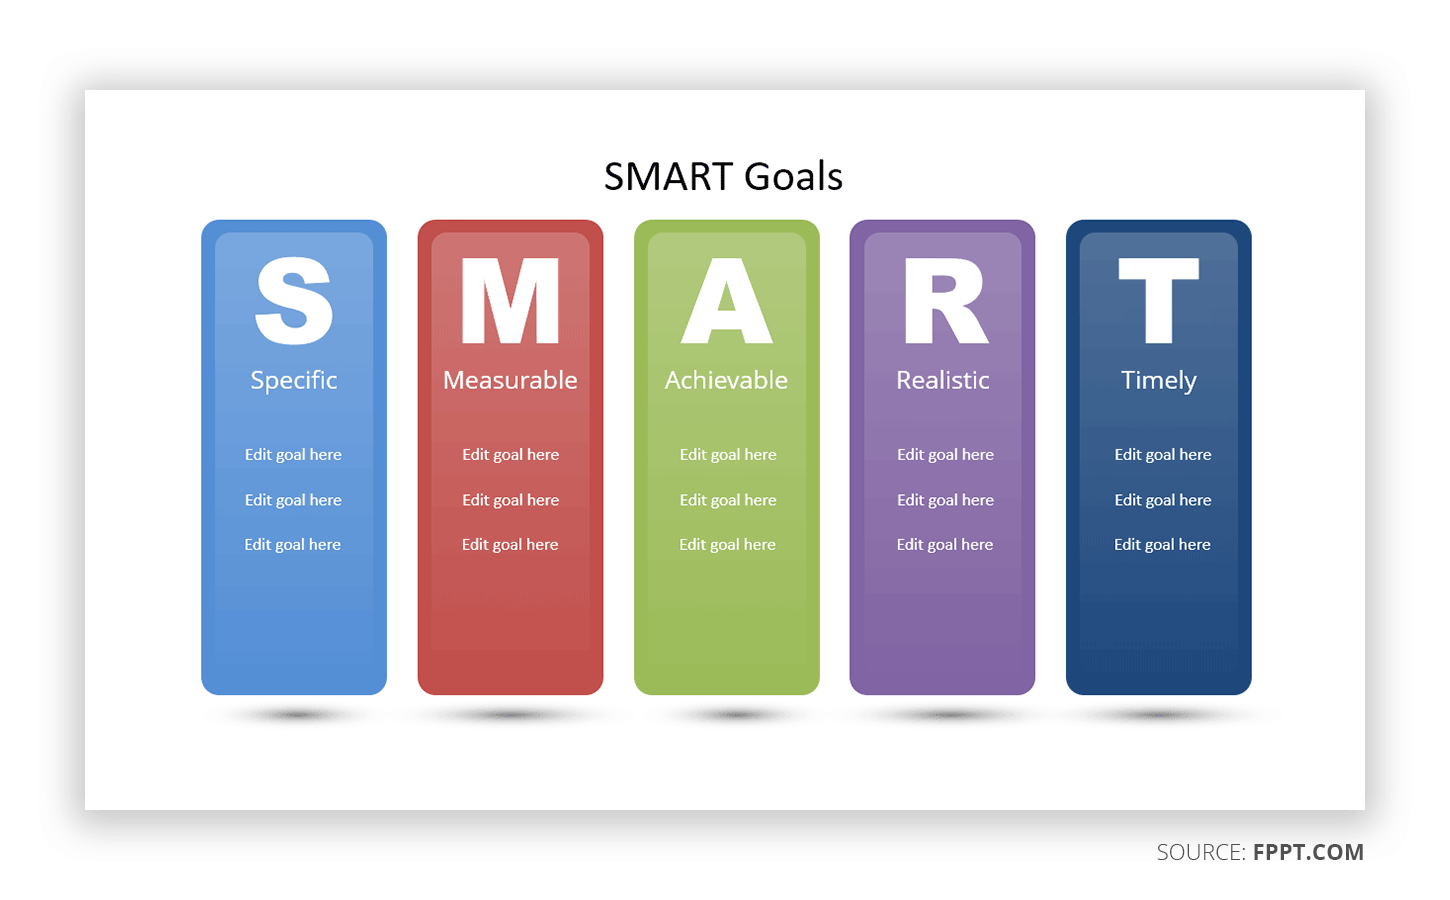 What are SMART Goals and How to Use Them